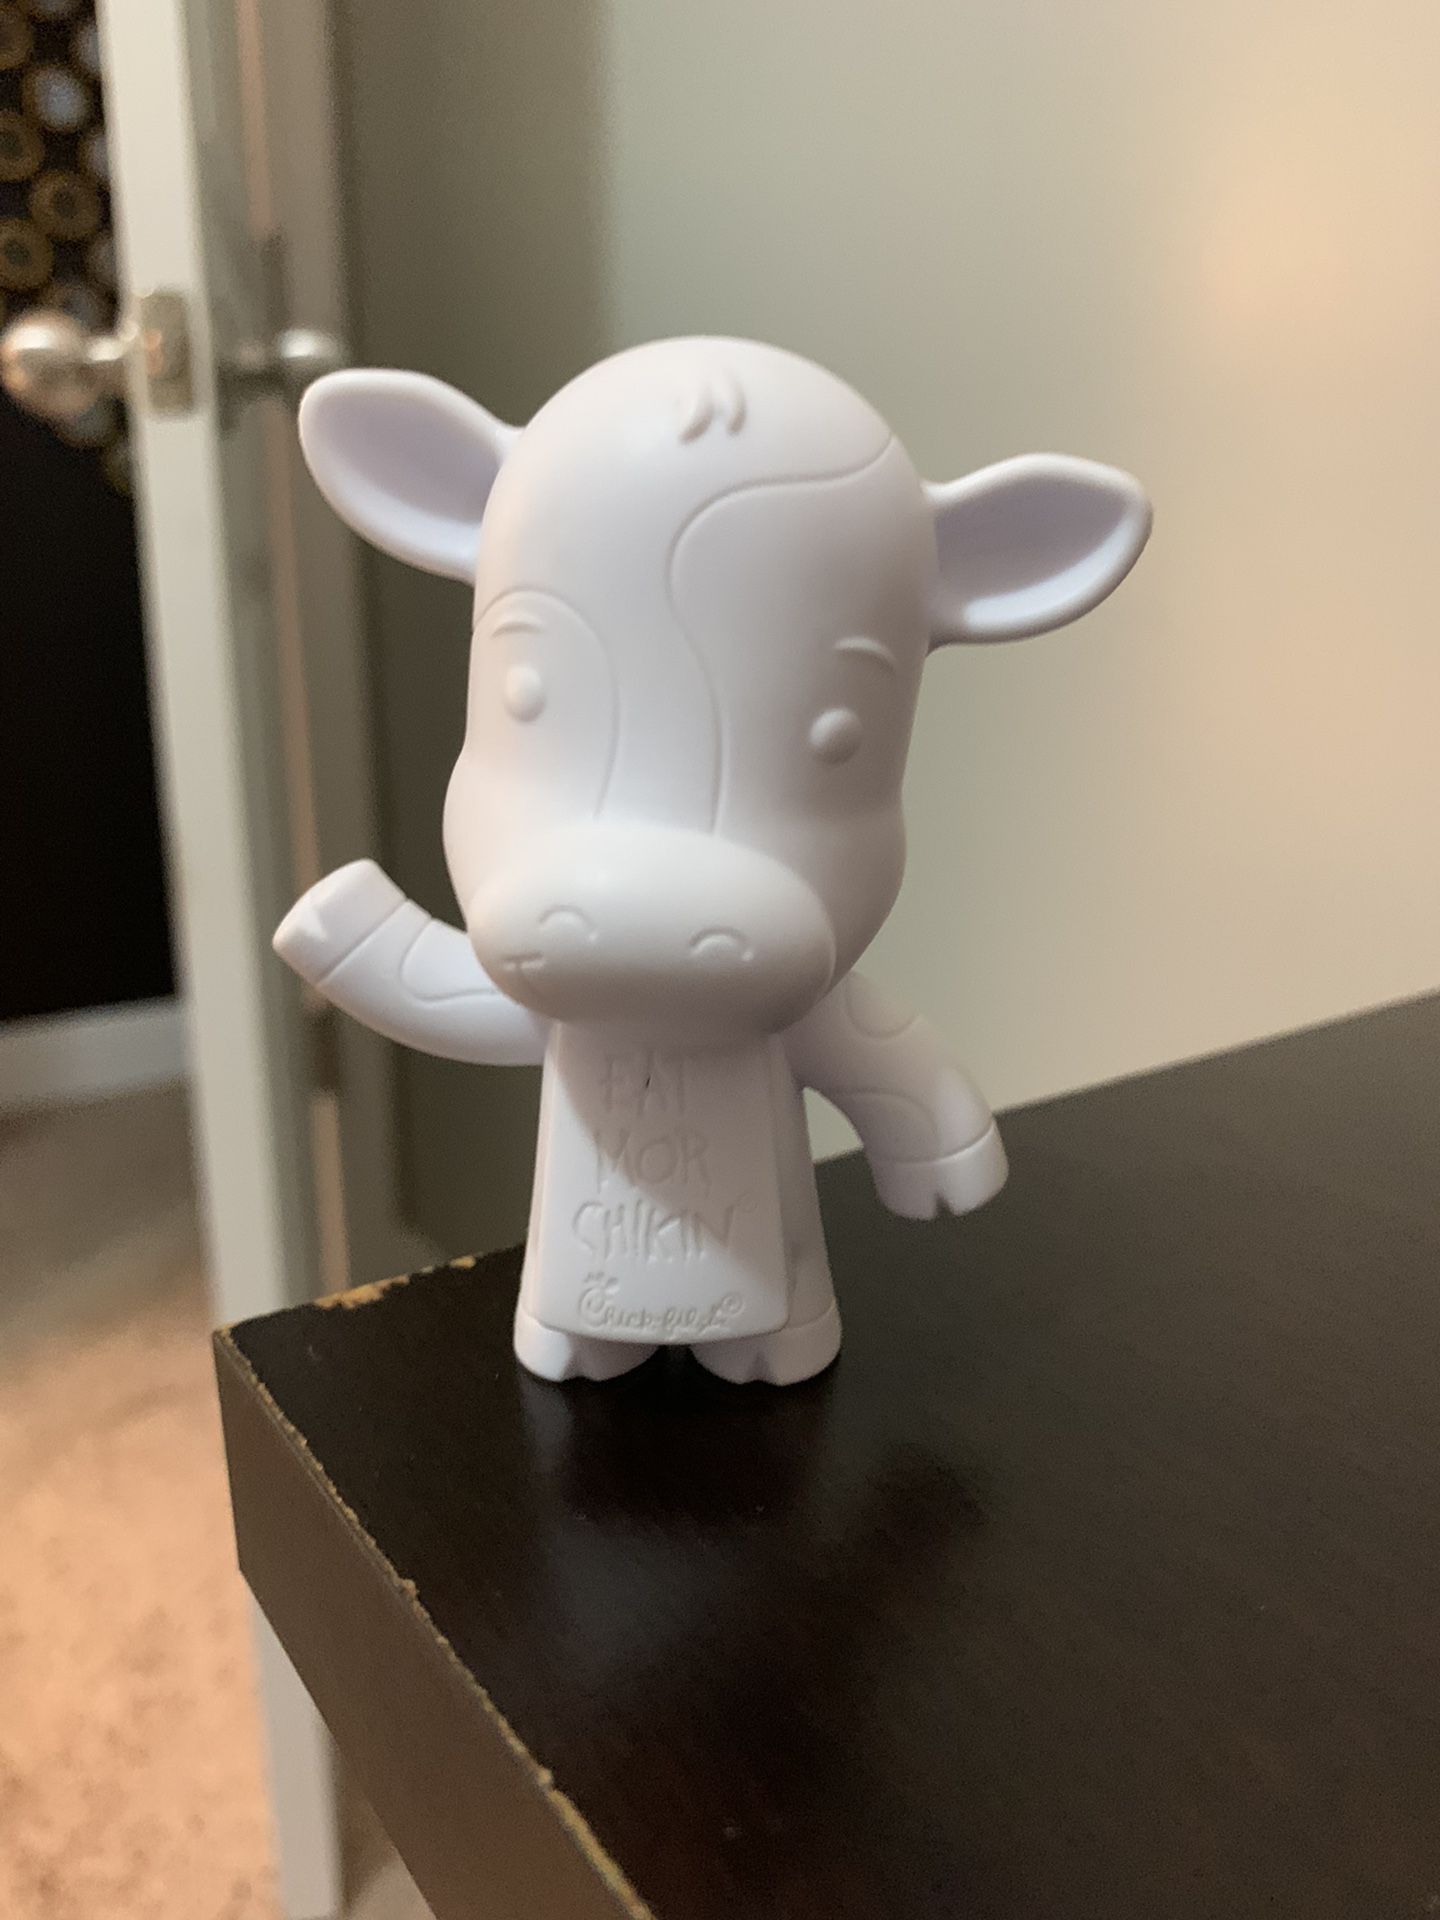 2019 Chick-fil-A Kids Meal Toy COW CREATIONS "Waving Cow” Used